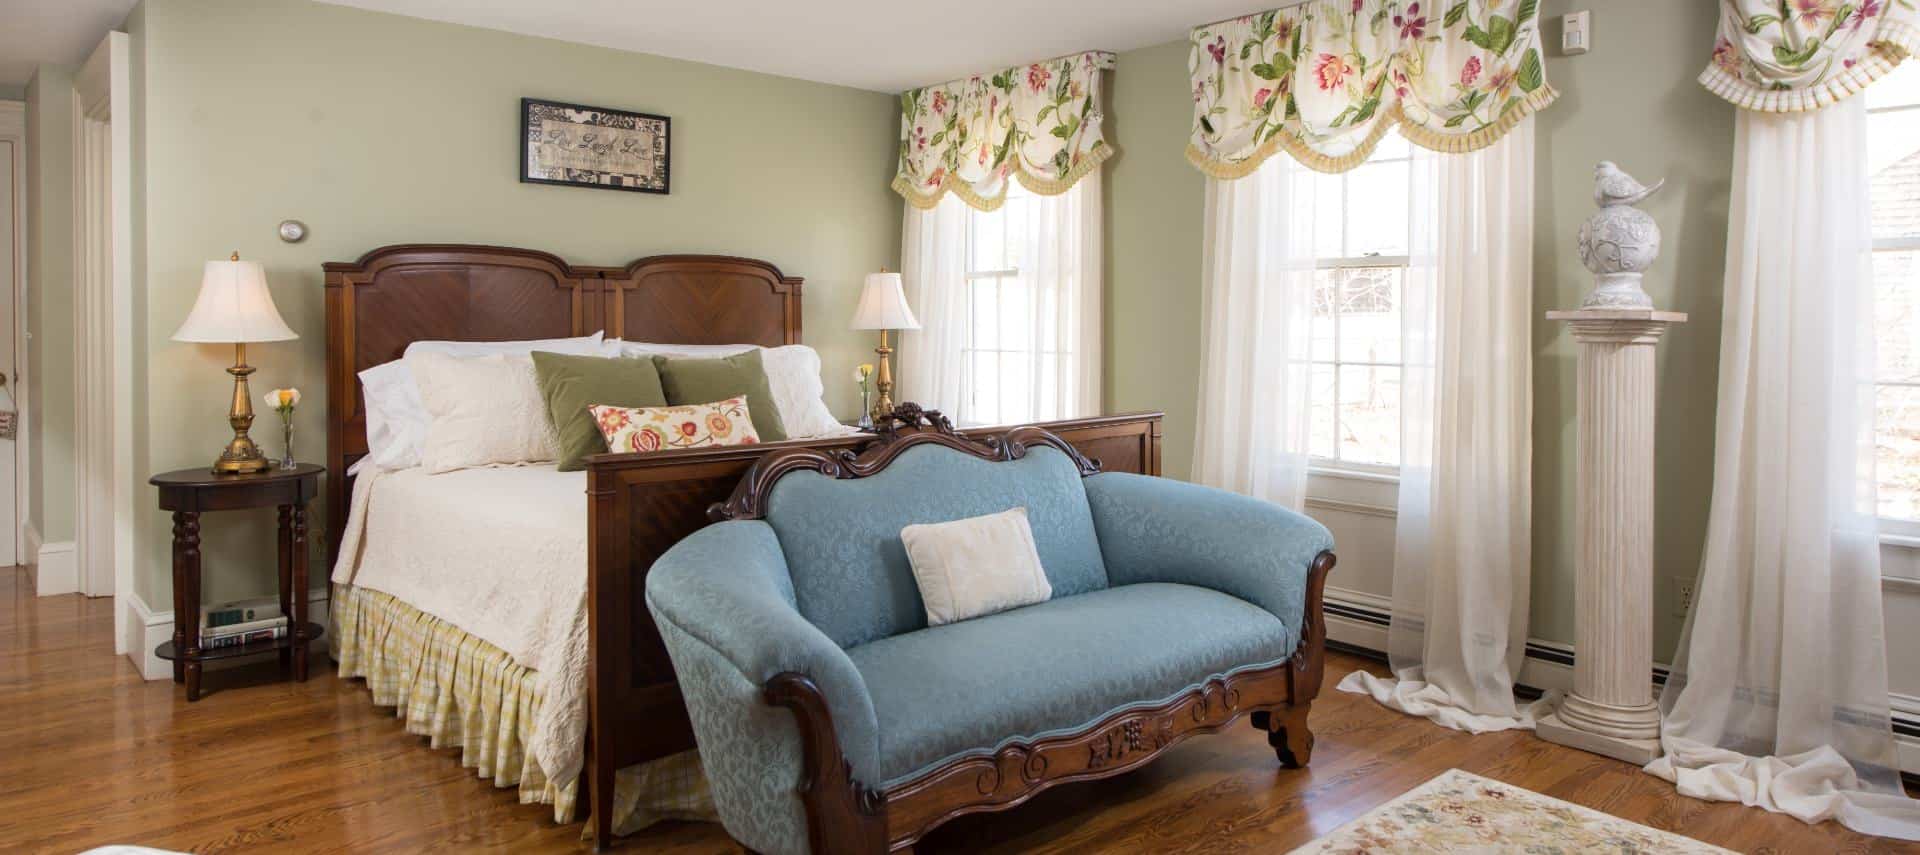 Bedroom with dark wooden furniture, cream and yellow bedding, ornate wooden love seat with blue upholstery, and sheer curtains